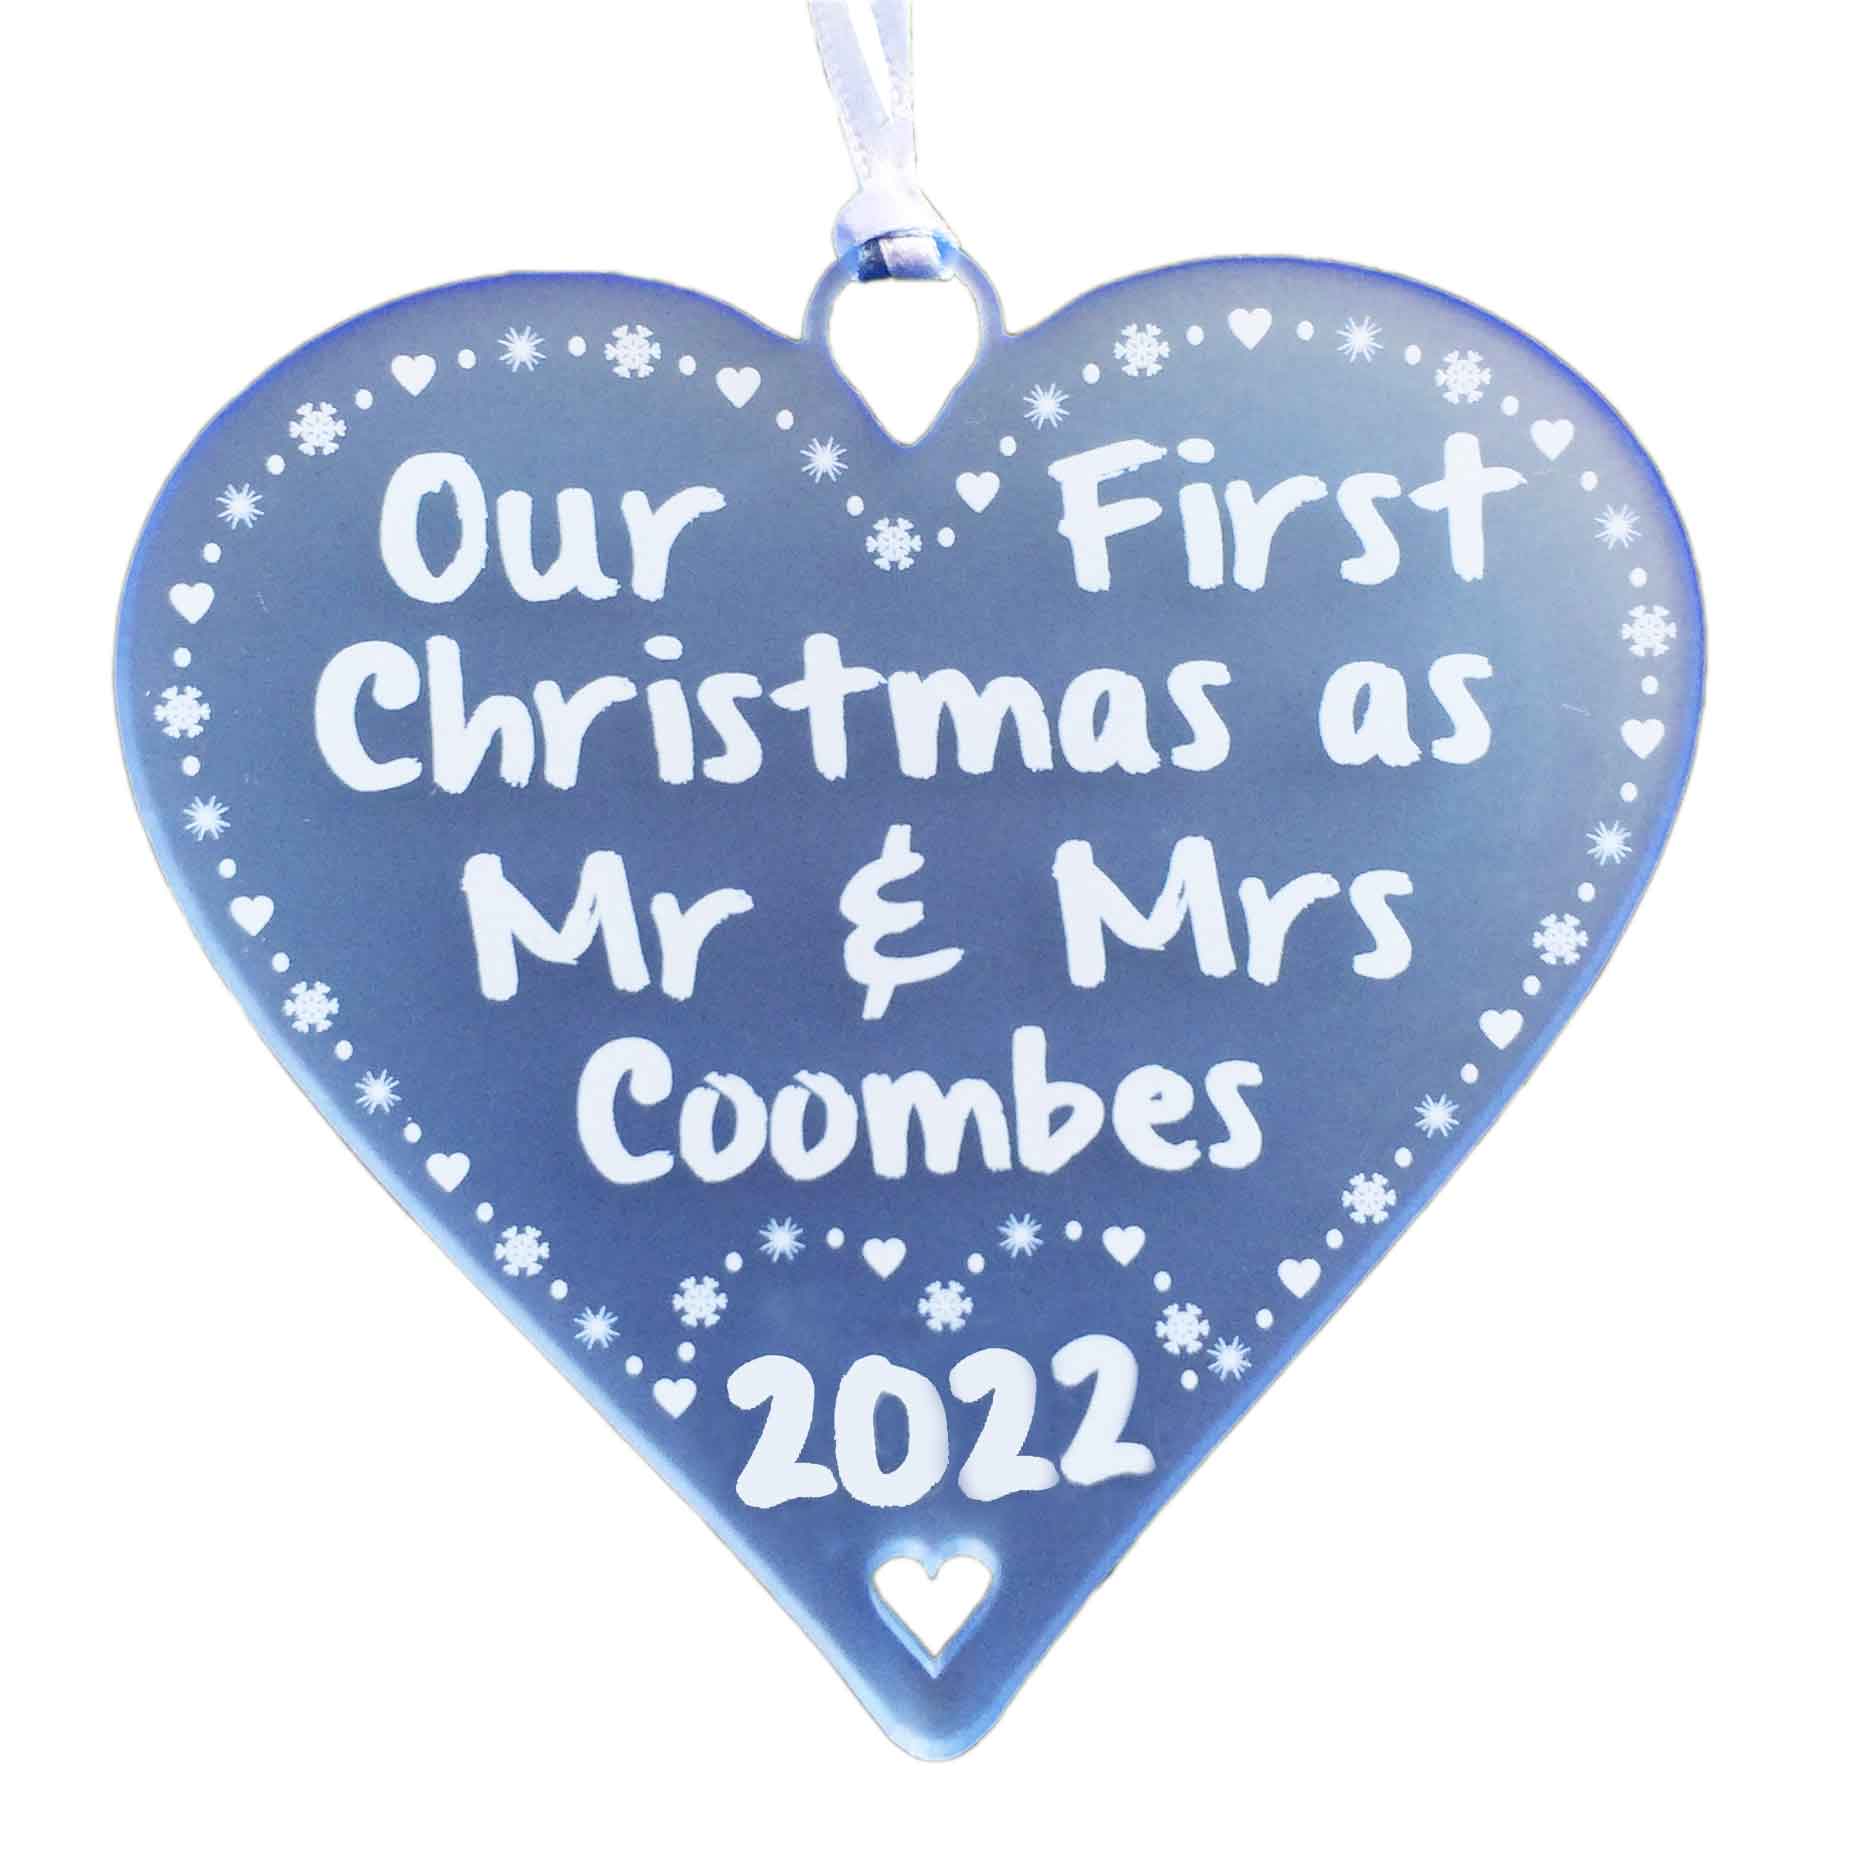 First Christmas Married in 2023 as Mr & Mrs Personalised Bauble - 10cm Heart